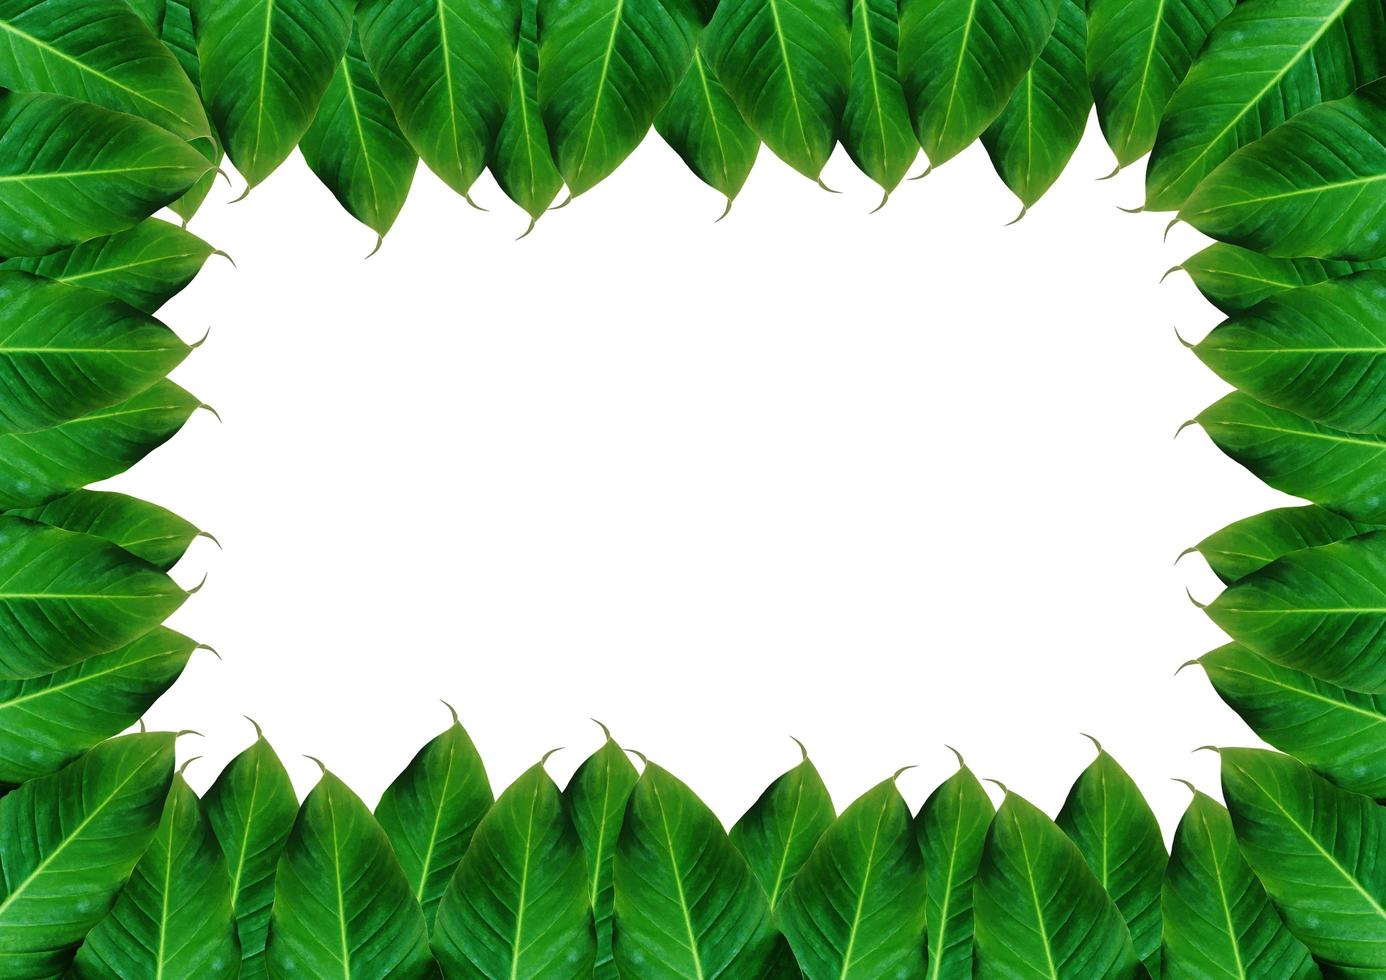 Top view of green leaves border isolated on white background with clipping path for design. Copy space for text, summer photo